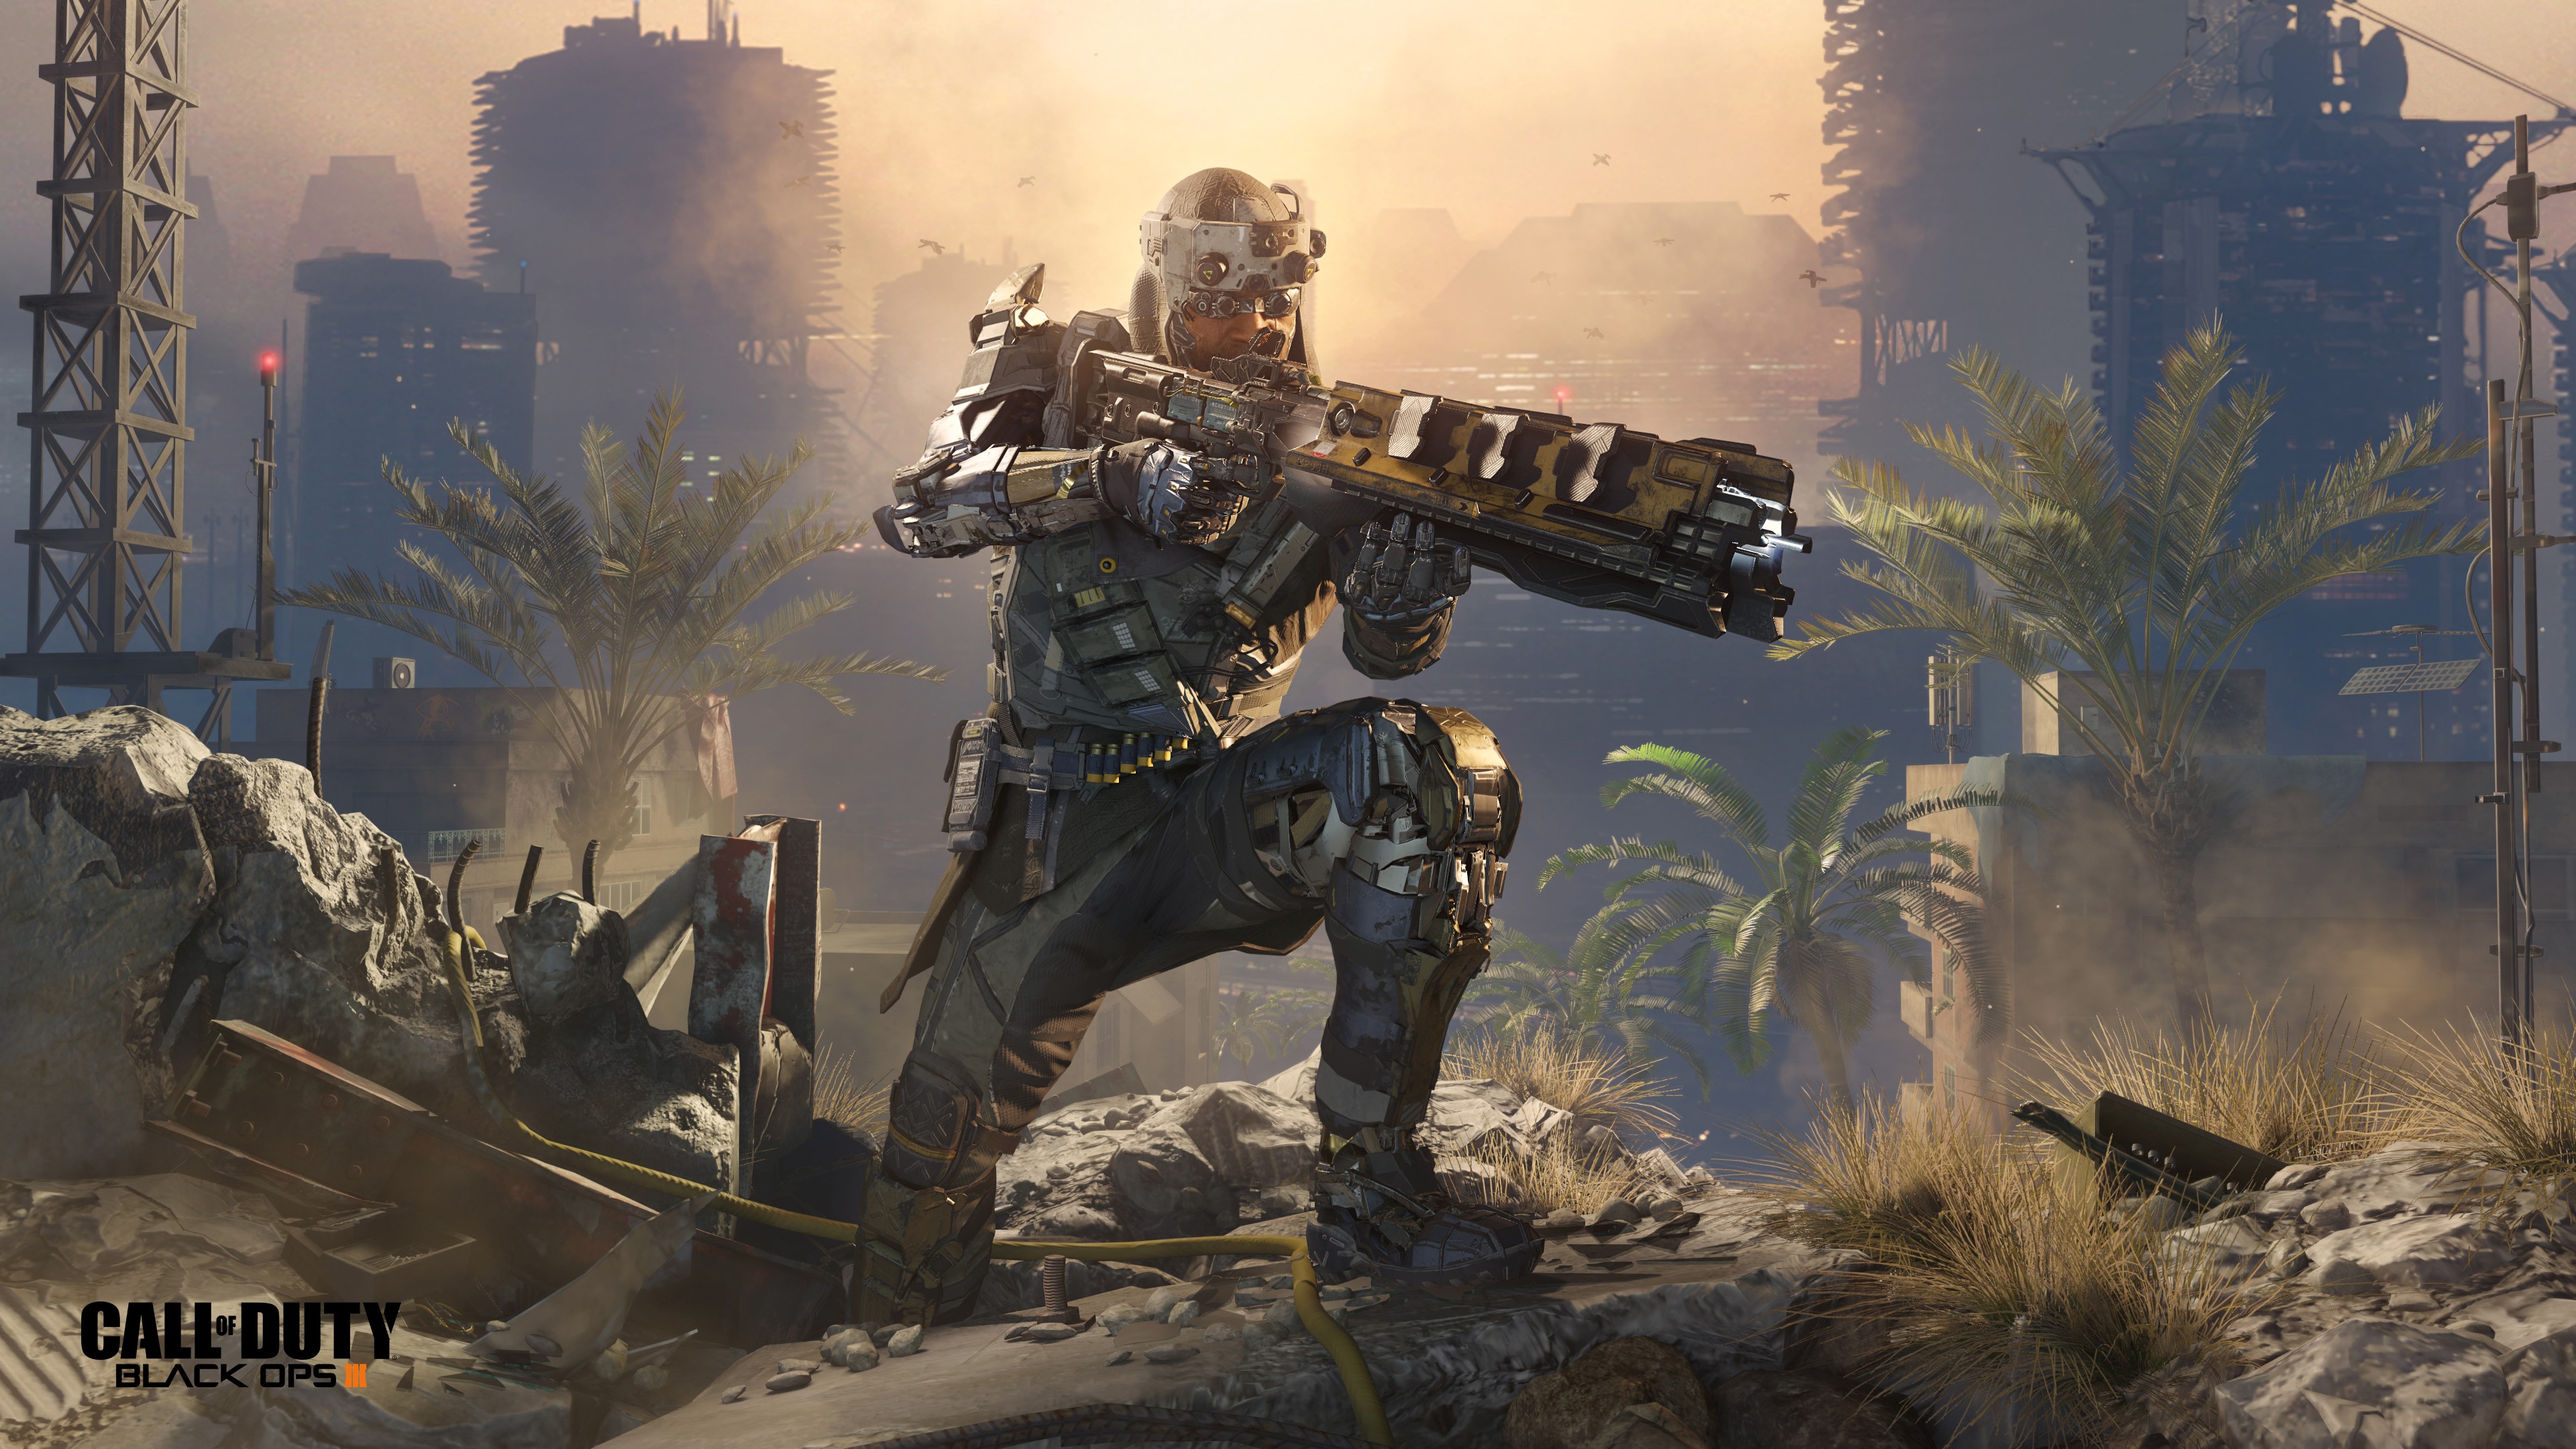 General 3840x2160 Call of Duty: Black Ops III Call of Duty video games military soldier BO3 Spezialisten Black Ops 3 Spezialisten PC gaming weapon video game men